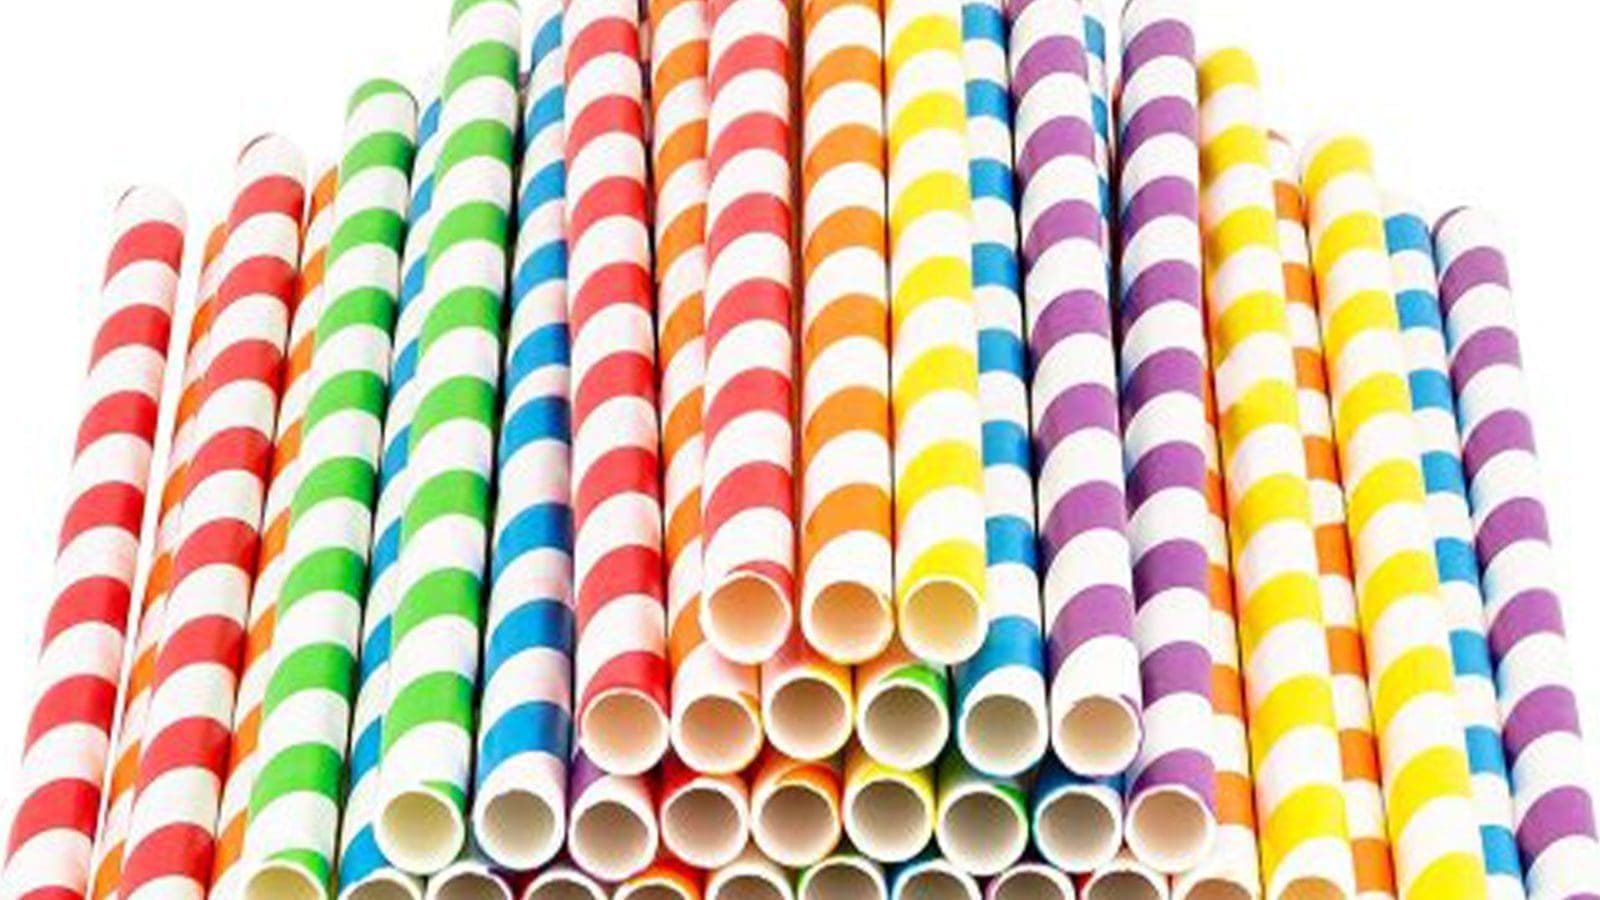 Health concerns arise as ‘forever chemicals’ found in popular paper straws